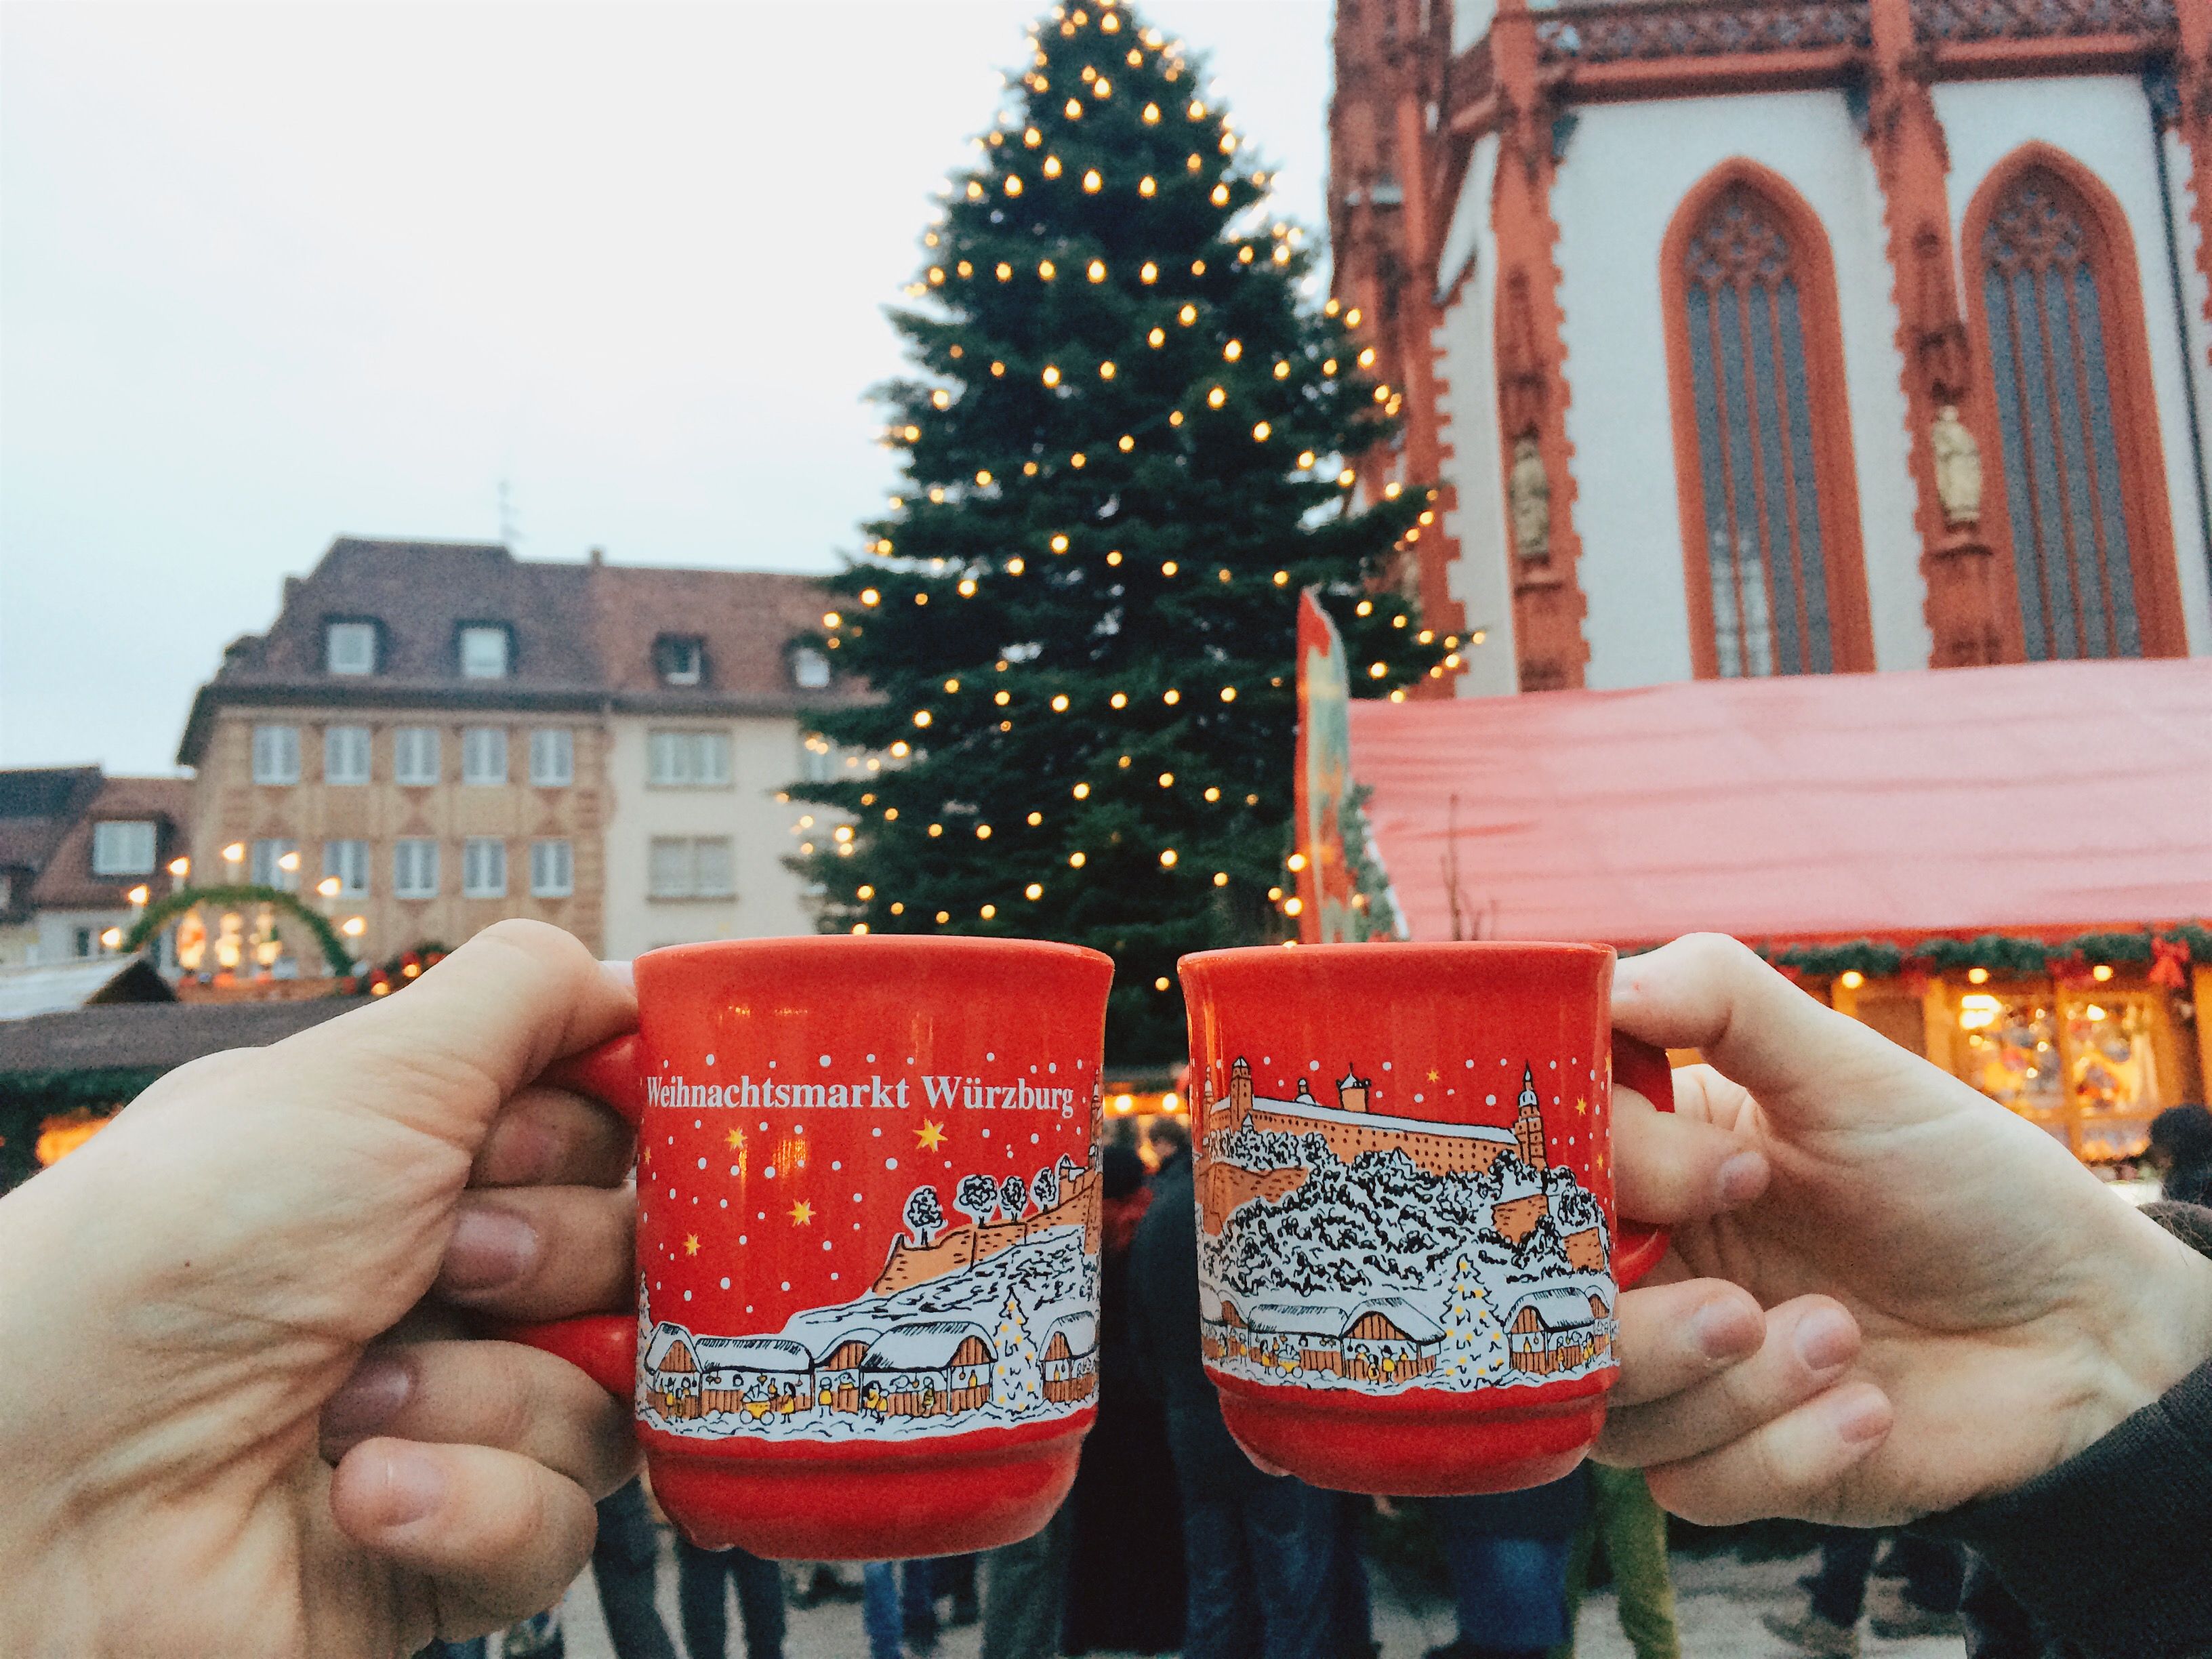 Christmas mugs before a tree. | Source: Getty Images